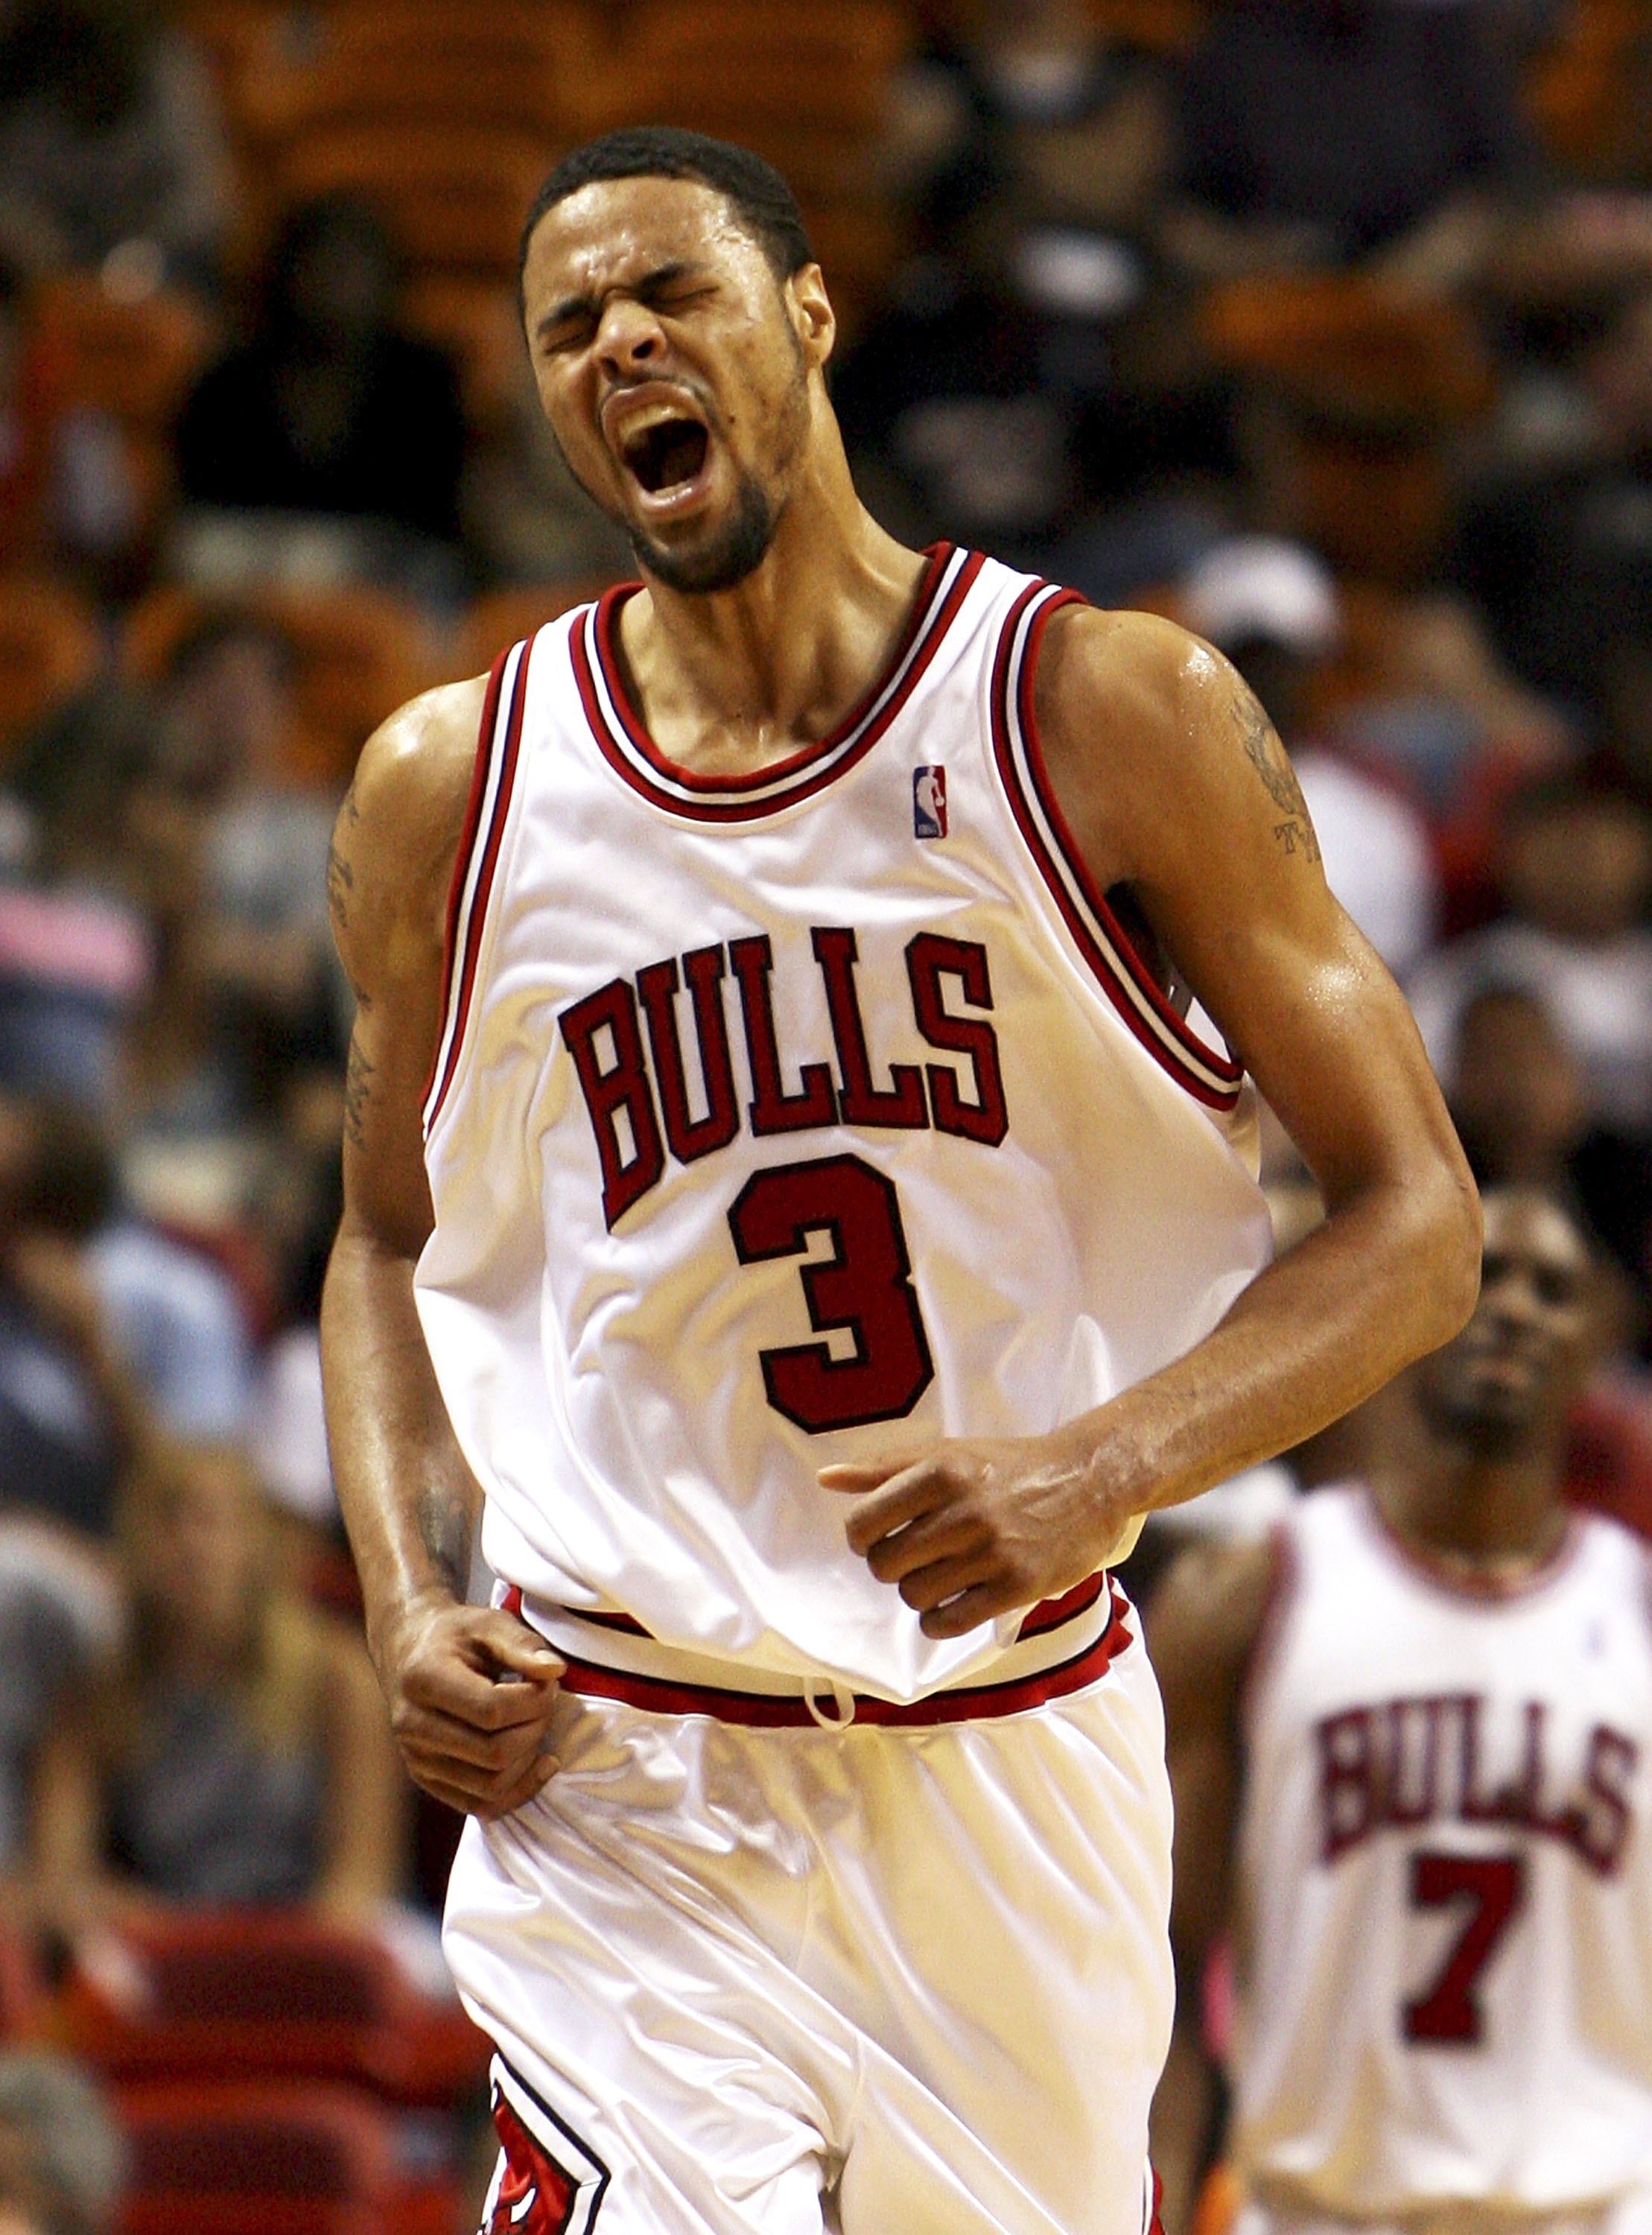 MIAMI - APRIL 16:  Tyson Chandler #3 of the Chicago Bulls celebrates after hitting a big shot in the fourth quarter against the Miami Heat on April 16, 2006 at American Airlines Arena in Miami, Florida. The Bulls defeated the Heat 117-93 and clinched a pl